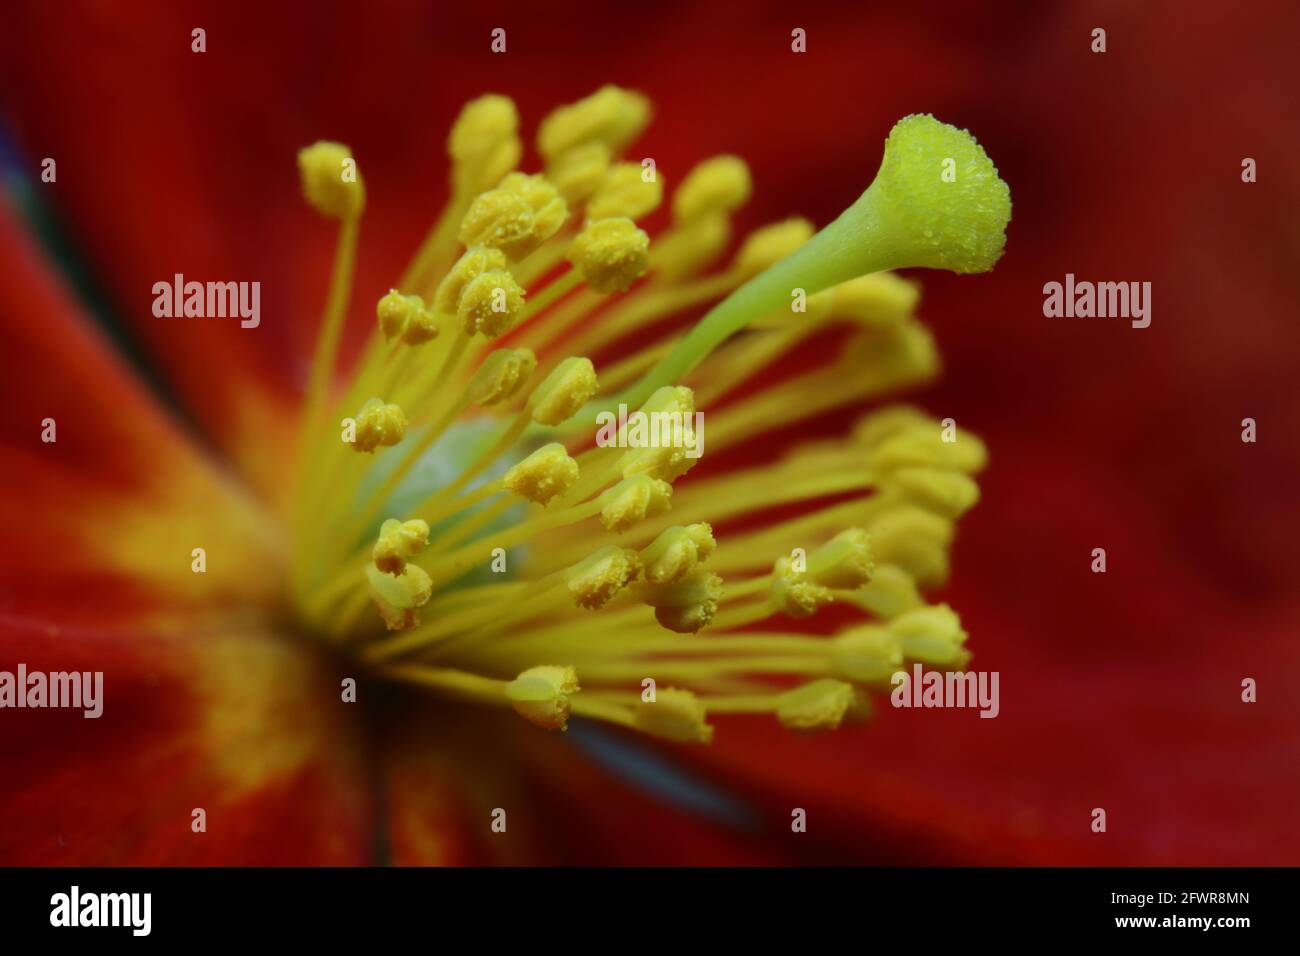 Close up of a helianthemum rock rose flower showing yellow stamen and anthers Stock Photo